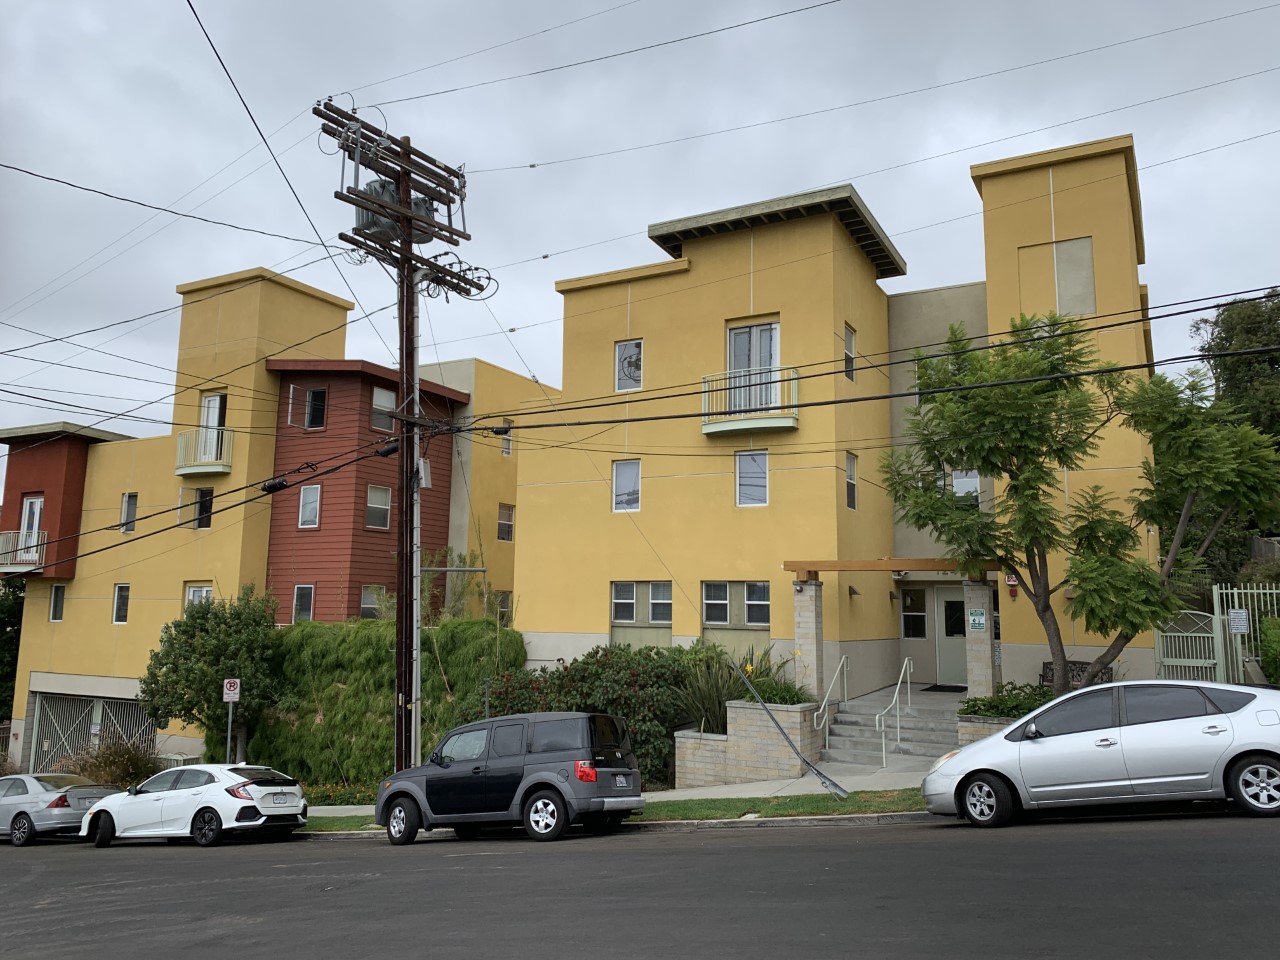 Street view of Innes Heights Apartments. Multi-Level building with cars parked on the street